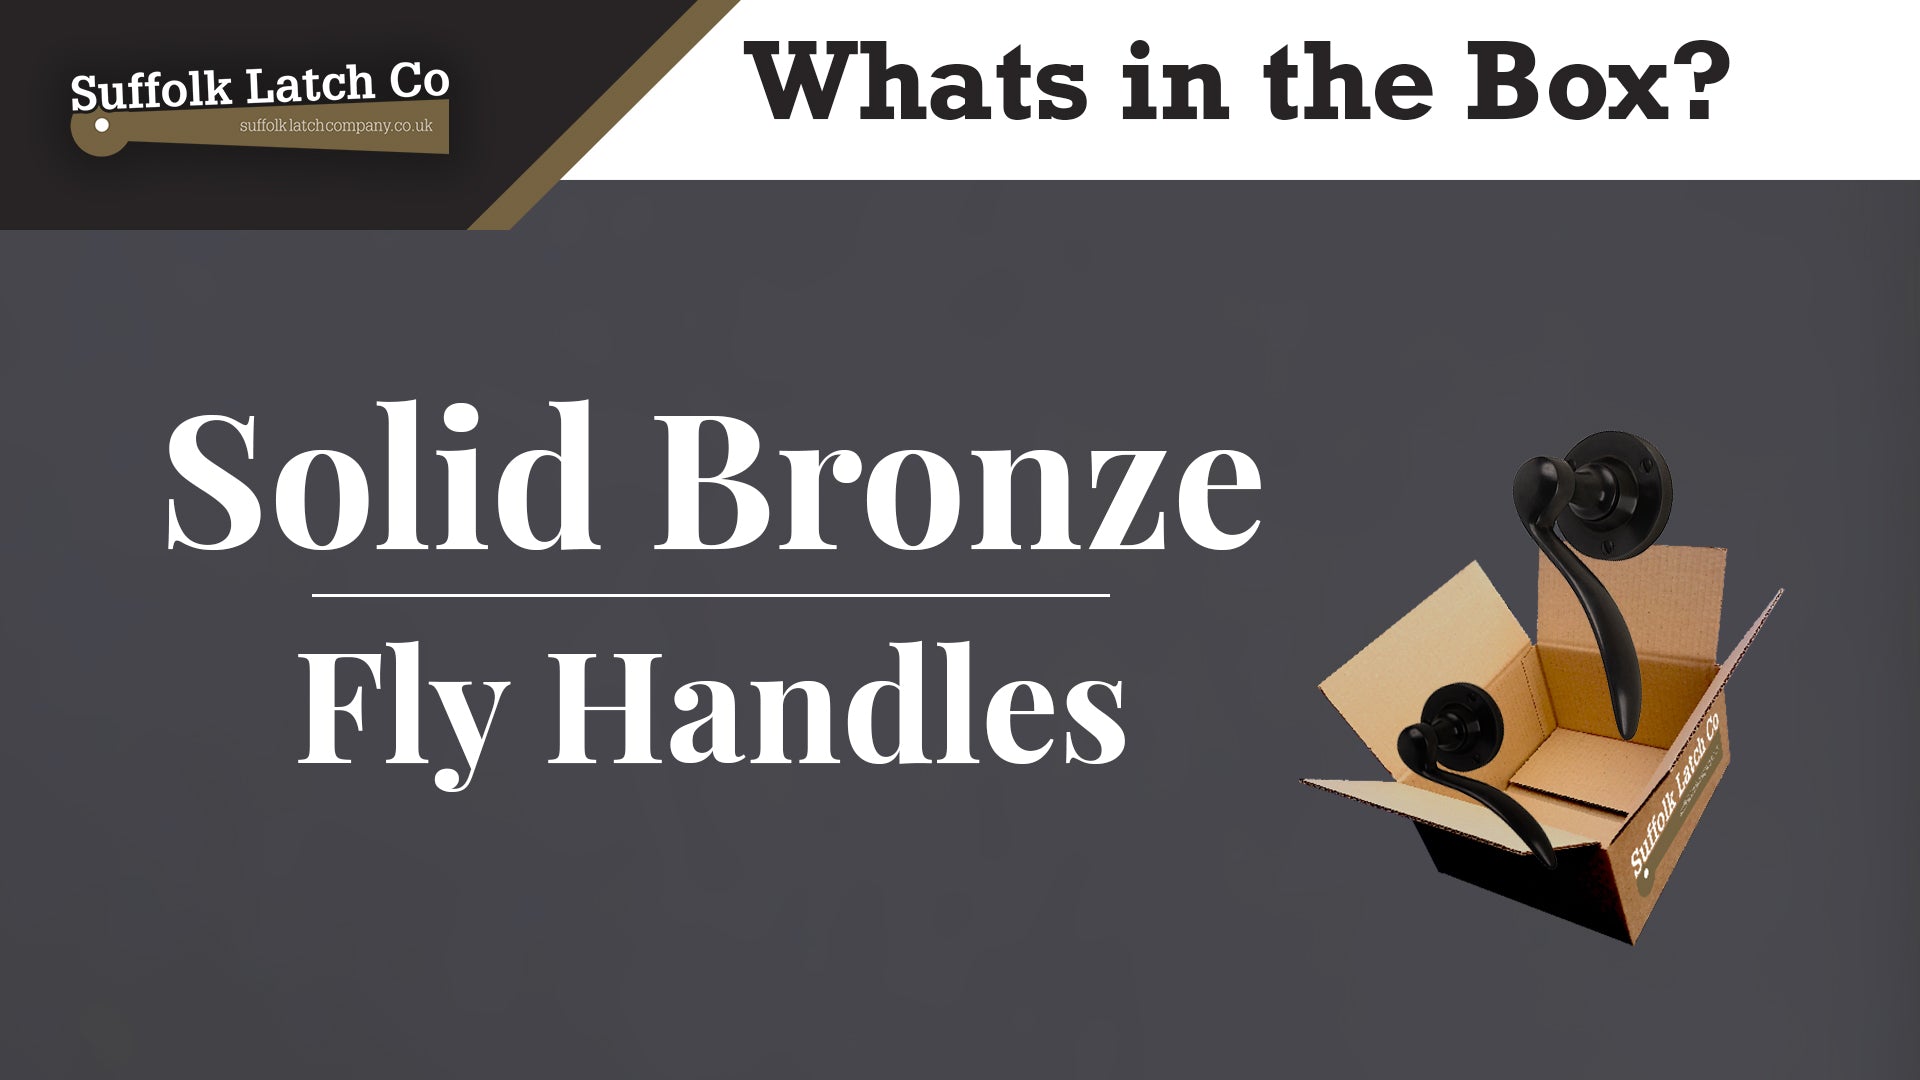 What's in the Box: Fly Handles